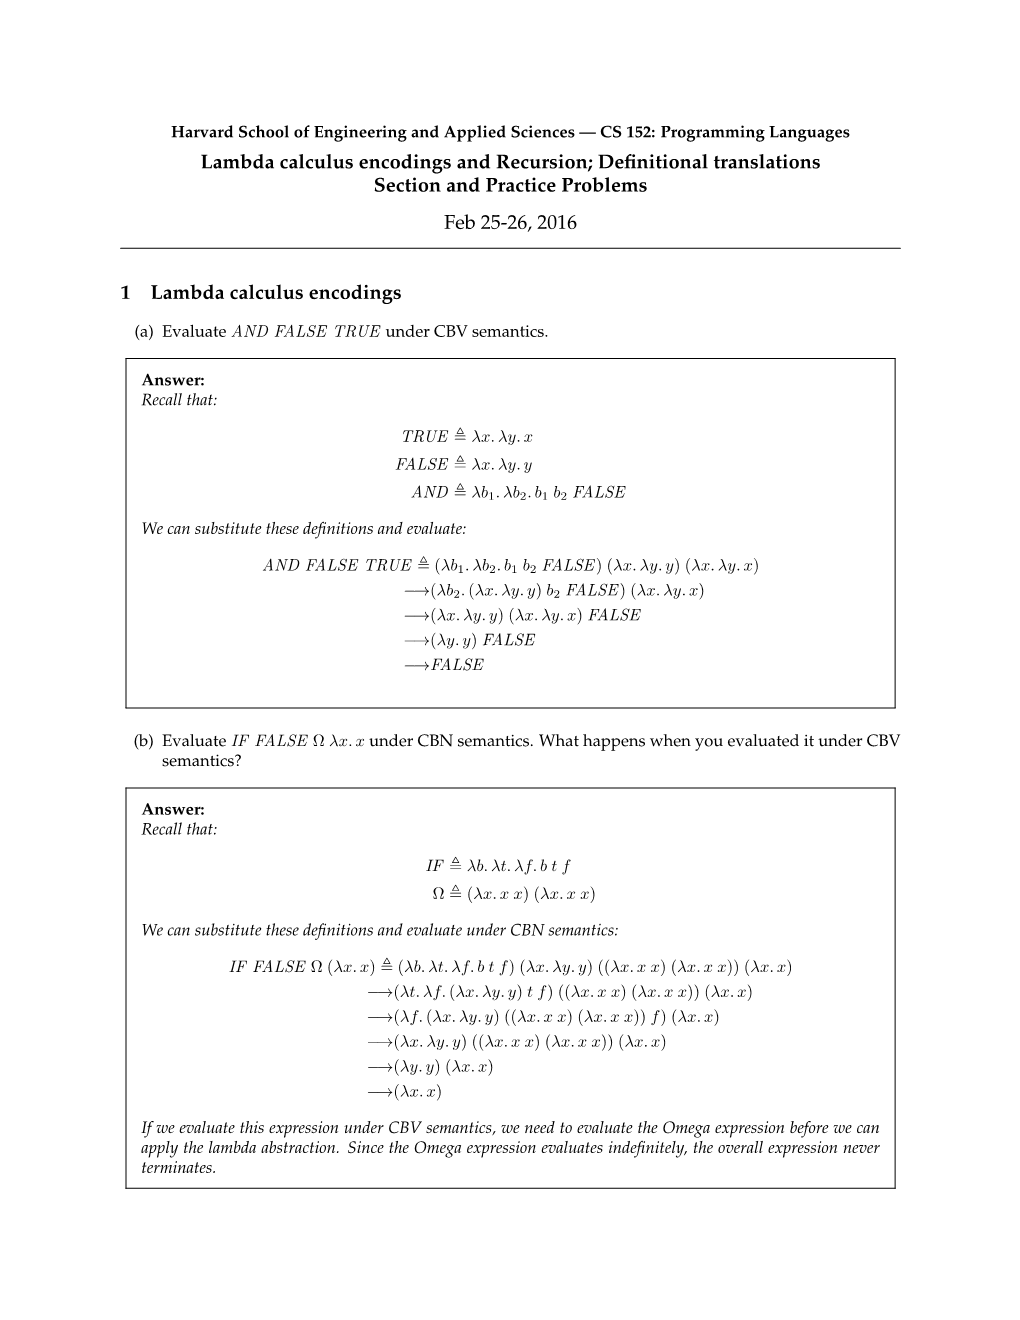 Lambda Calculus Encodings and Recursion; Deﬁnitional Translations Section and Practice Problems Feb 25-26, 2016